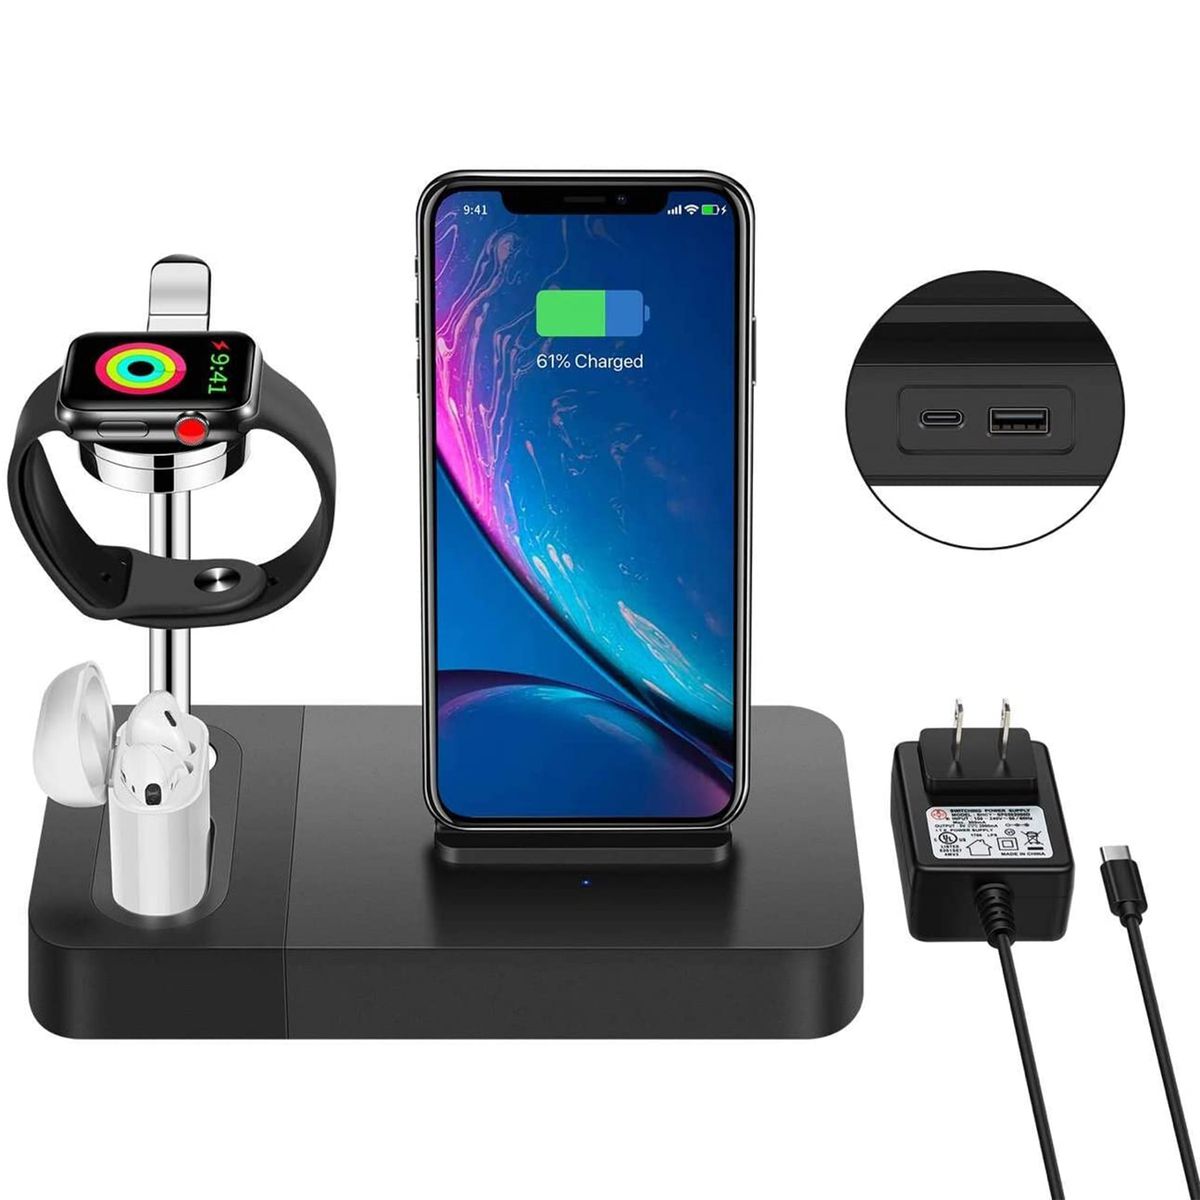 The Best Wireless Chargers For Android And Ios Devices In 2020 Travel Leisure,Keeping Up With The Joneses Movie Trailer